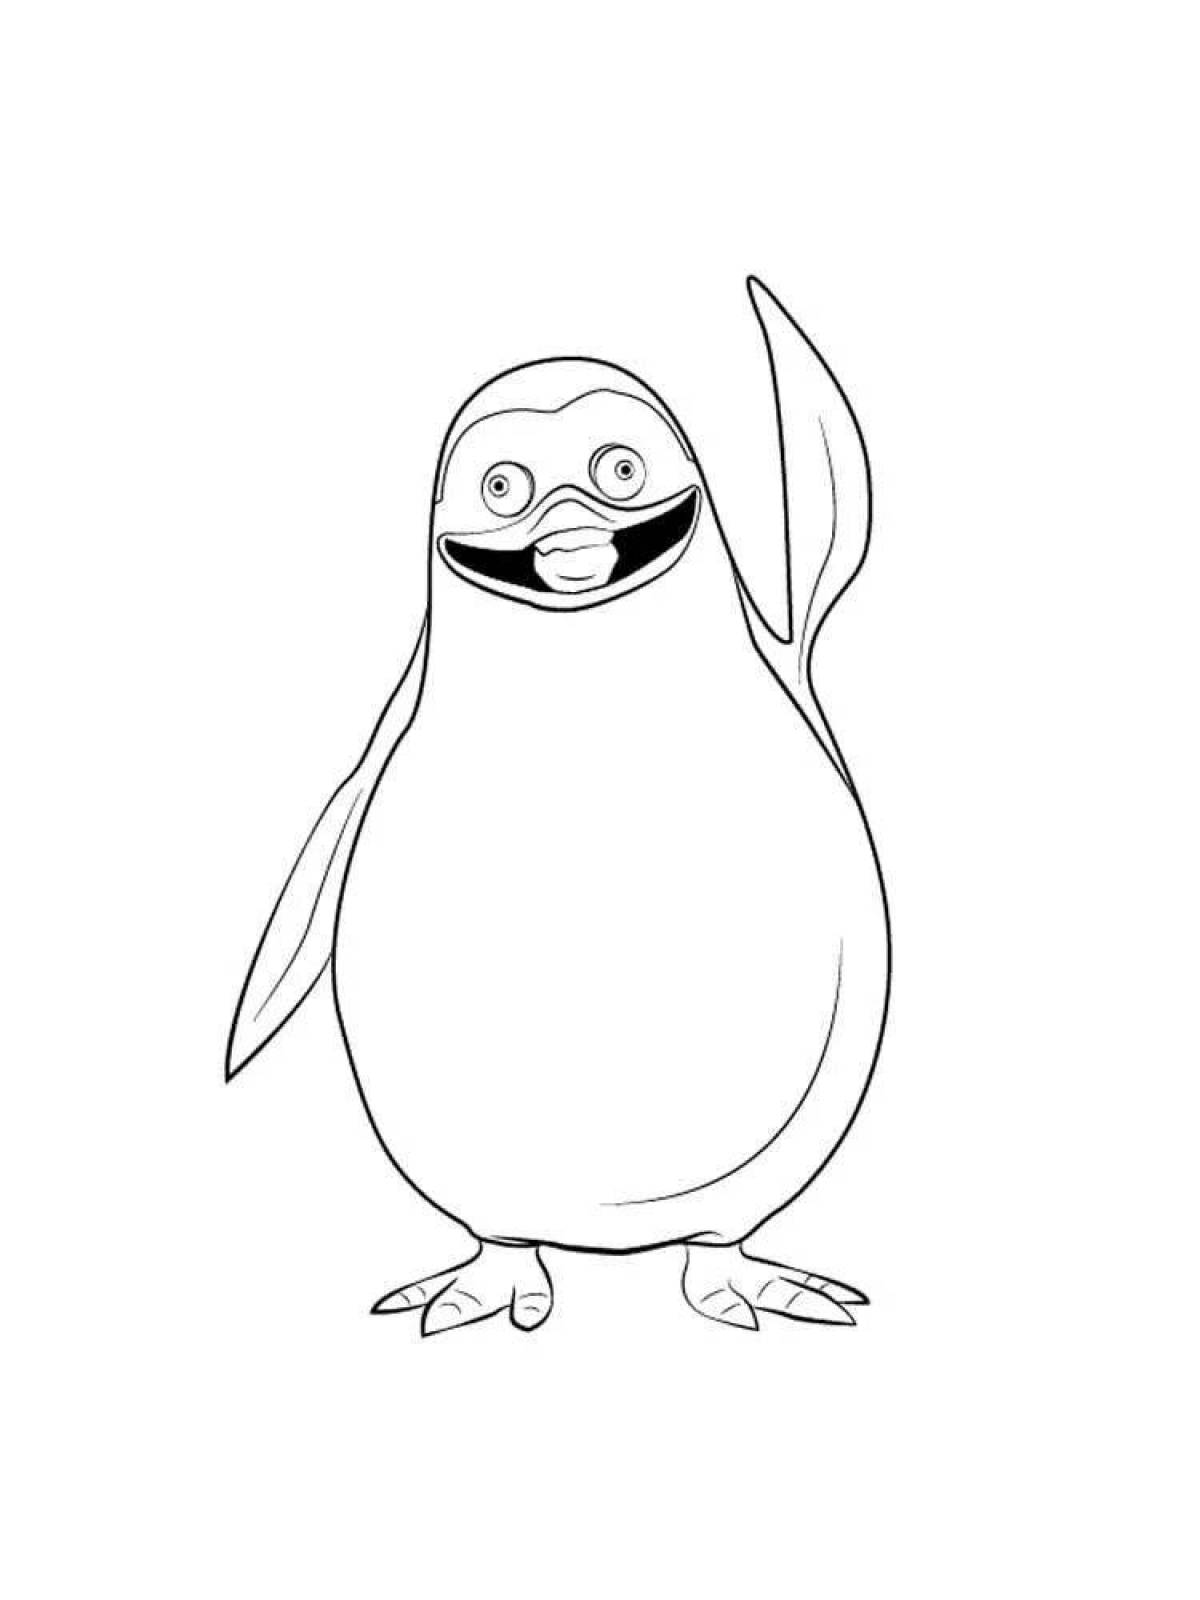 Colorful penguins from Madagascar